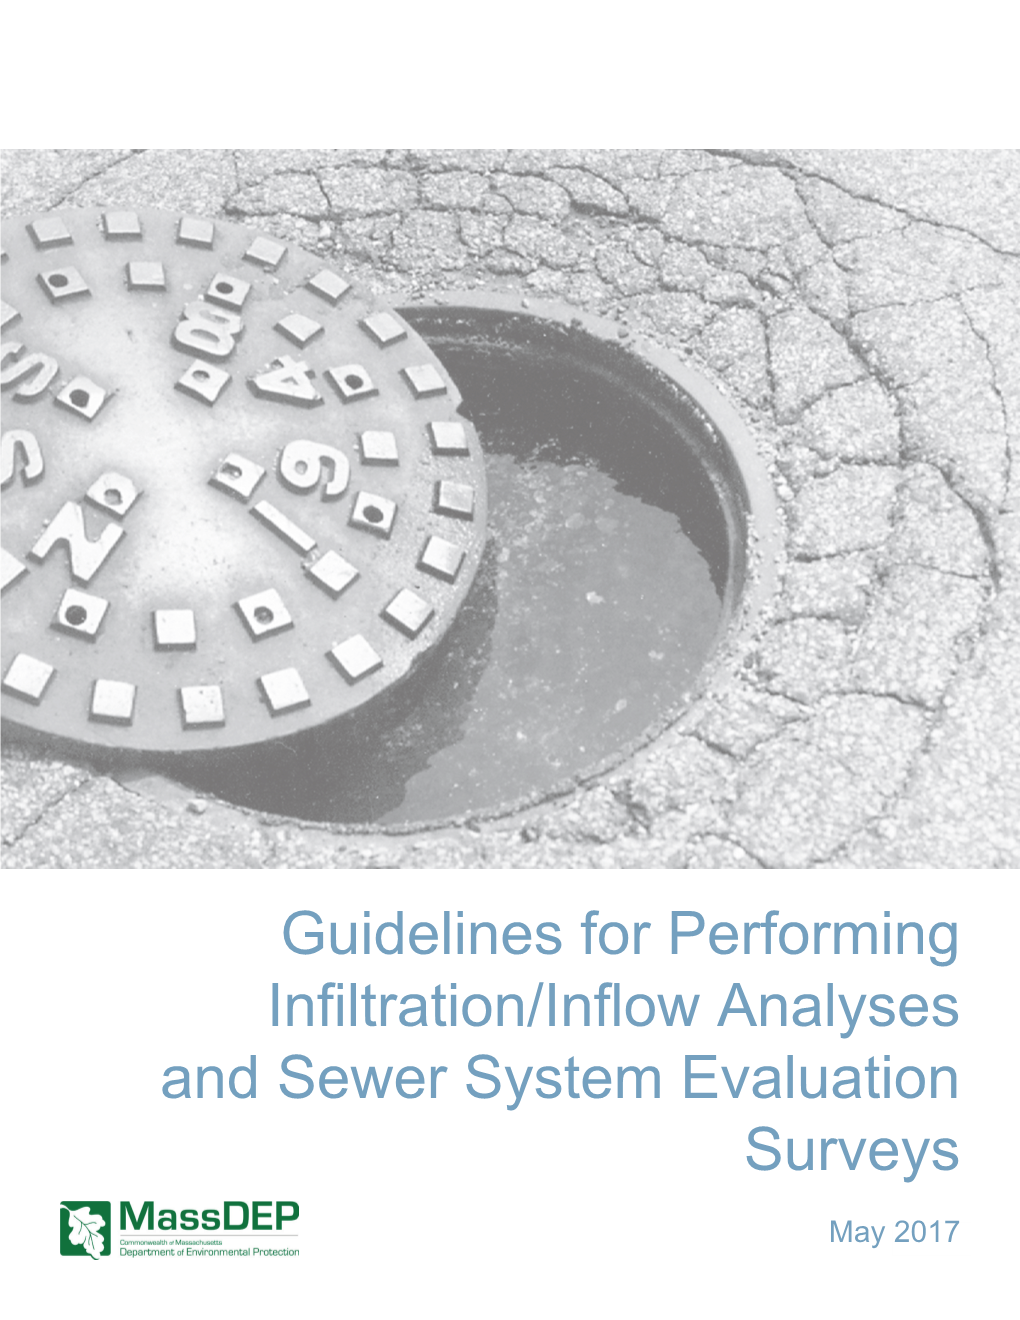 Guidelines for Performing Infiltration/Inflow Analyses and Sewer System Evaluation Surveys